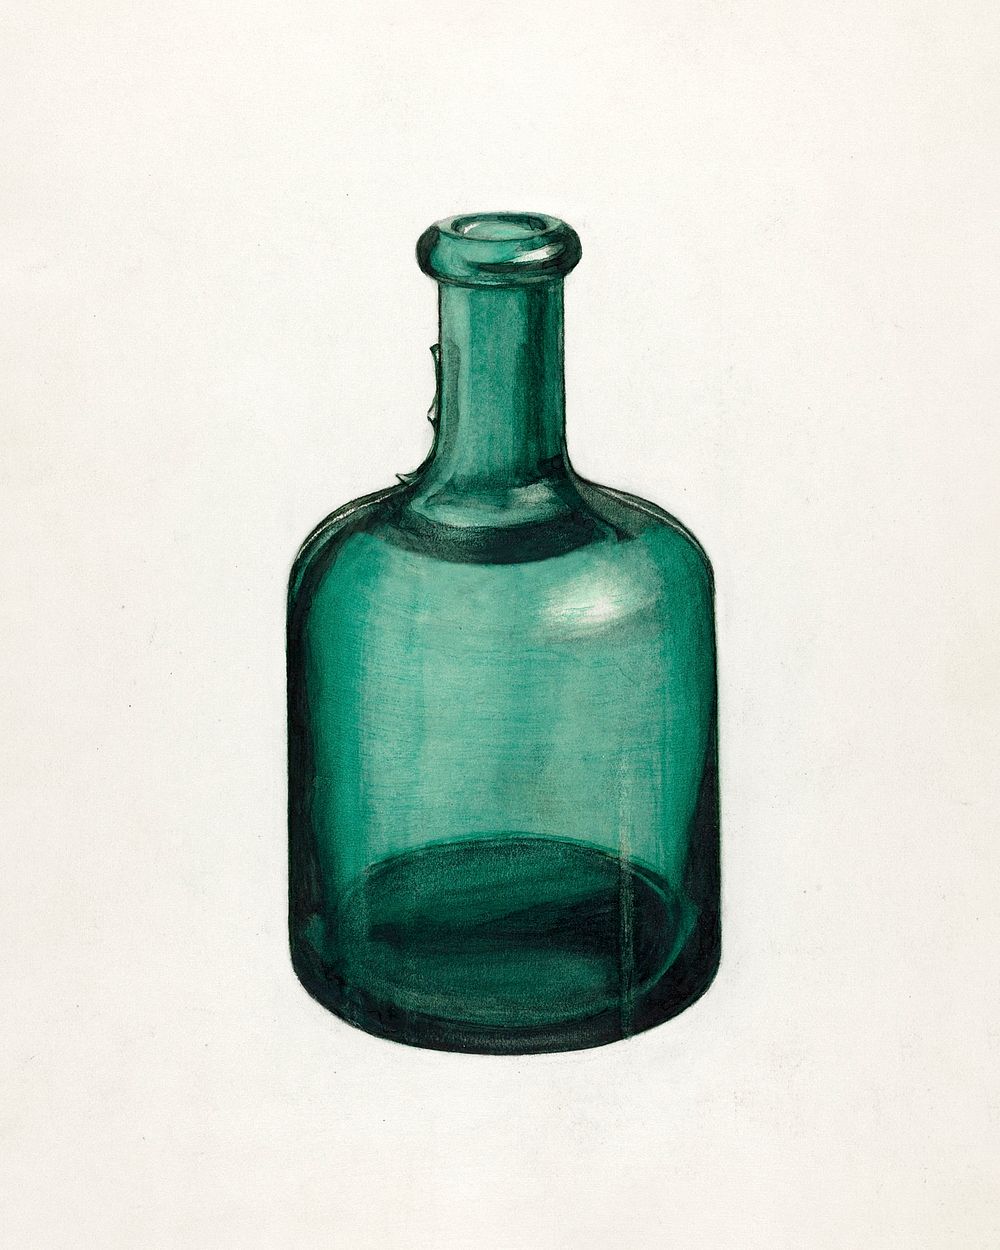 Blown Glass - Bottle (ca. 1937) by John Fisk. Original from The National Gallery of Art. Digitally enhanced by rawpixel.